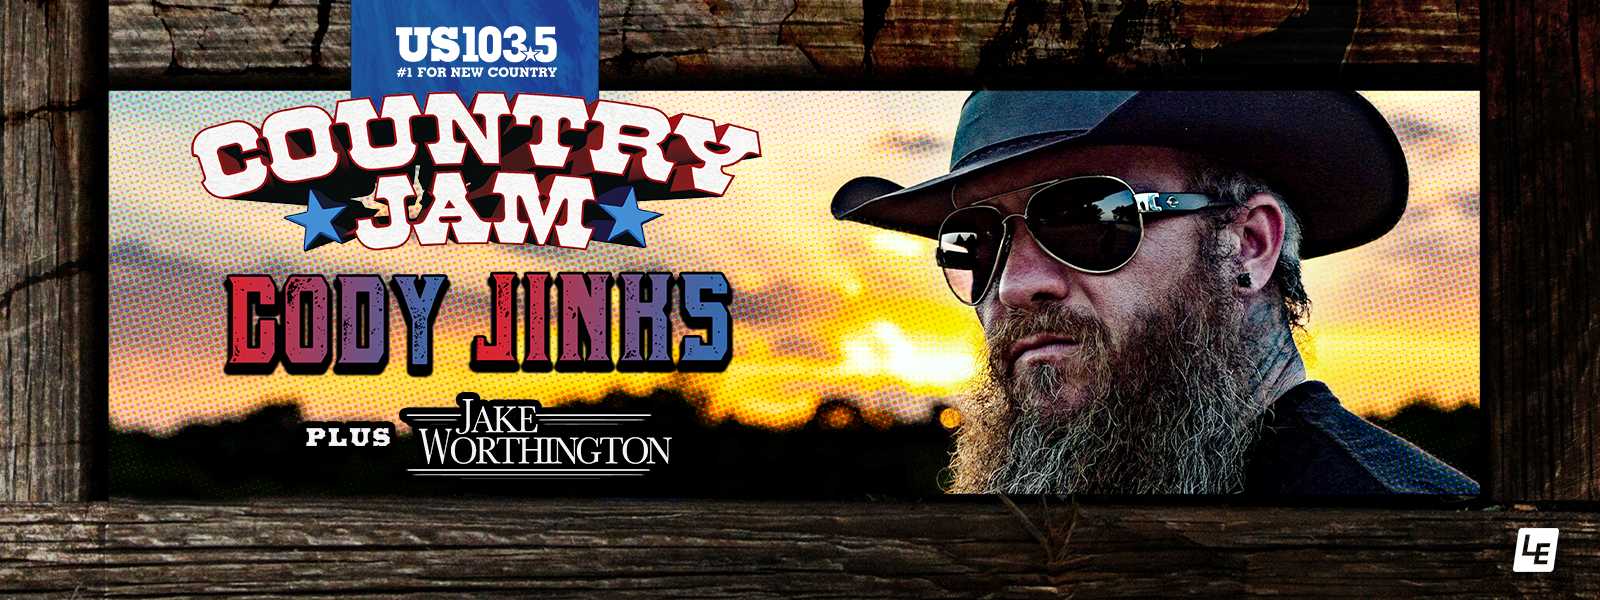 More Info for US103.5’s Country Jam starring Cody Jinks